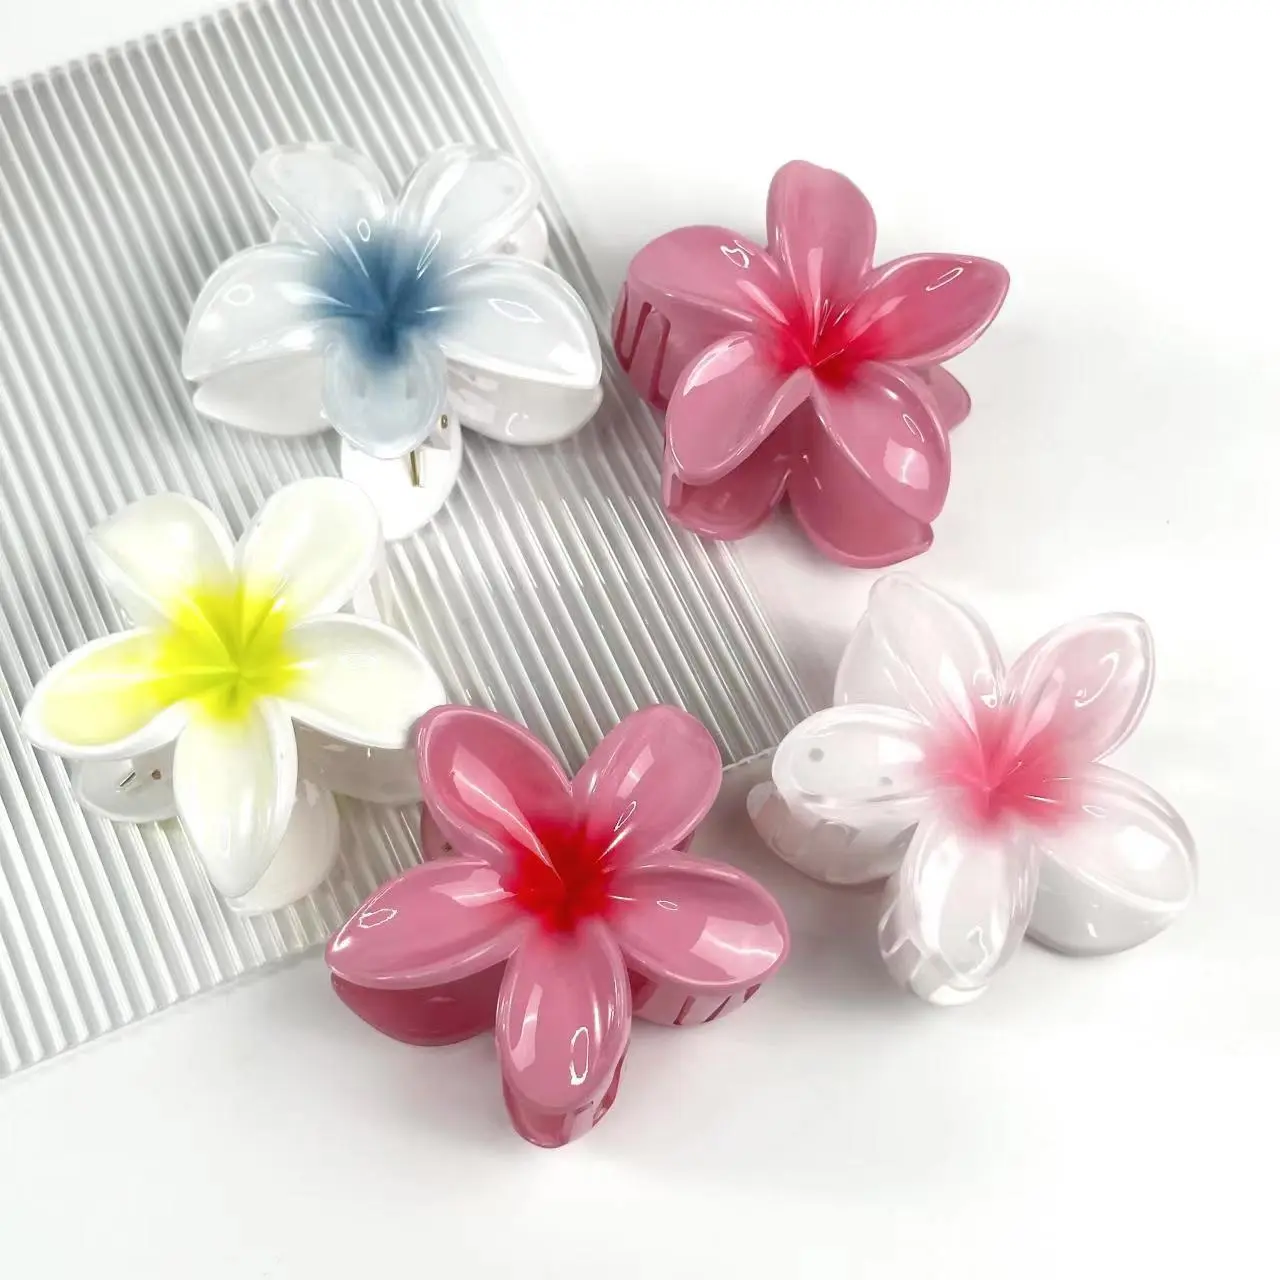 New color Flower Shaped Plastic Jaw Clips for Women and Girls Flower Hair Claws Clip W/certificate, Quality as E-J brand